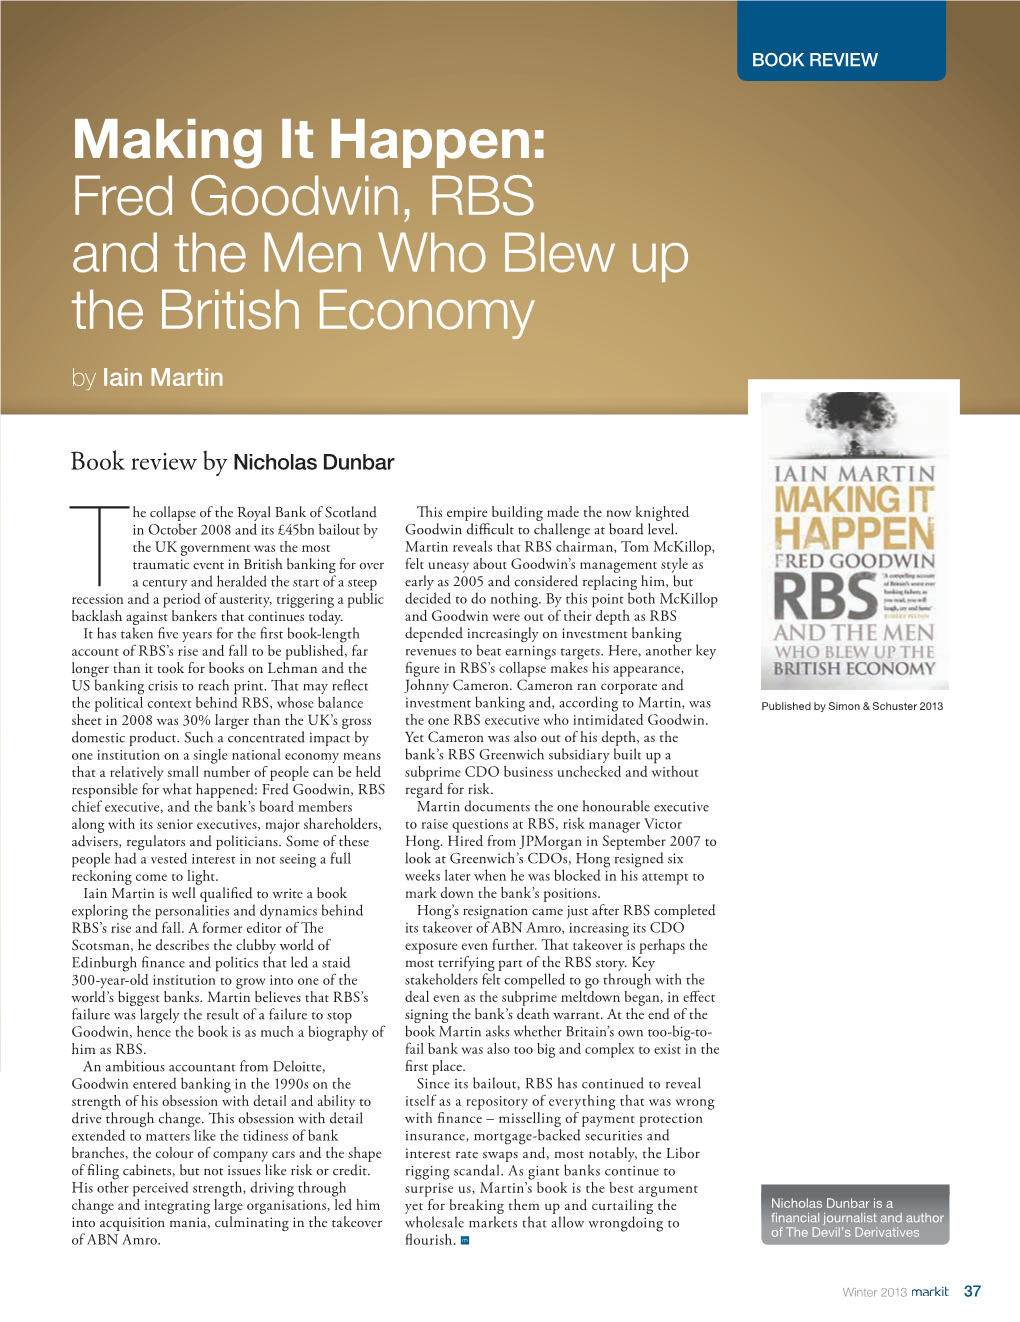 Fred Goodwin, RBS and the Men Who Blew up the British Economy